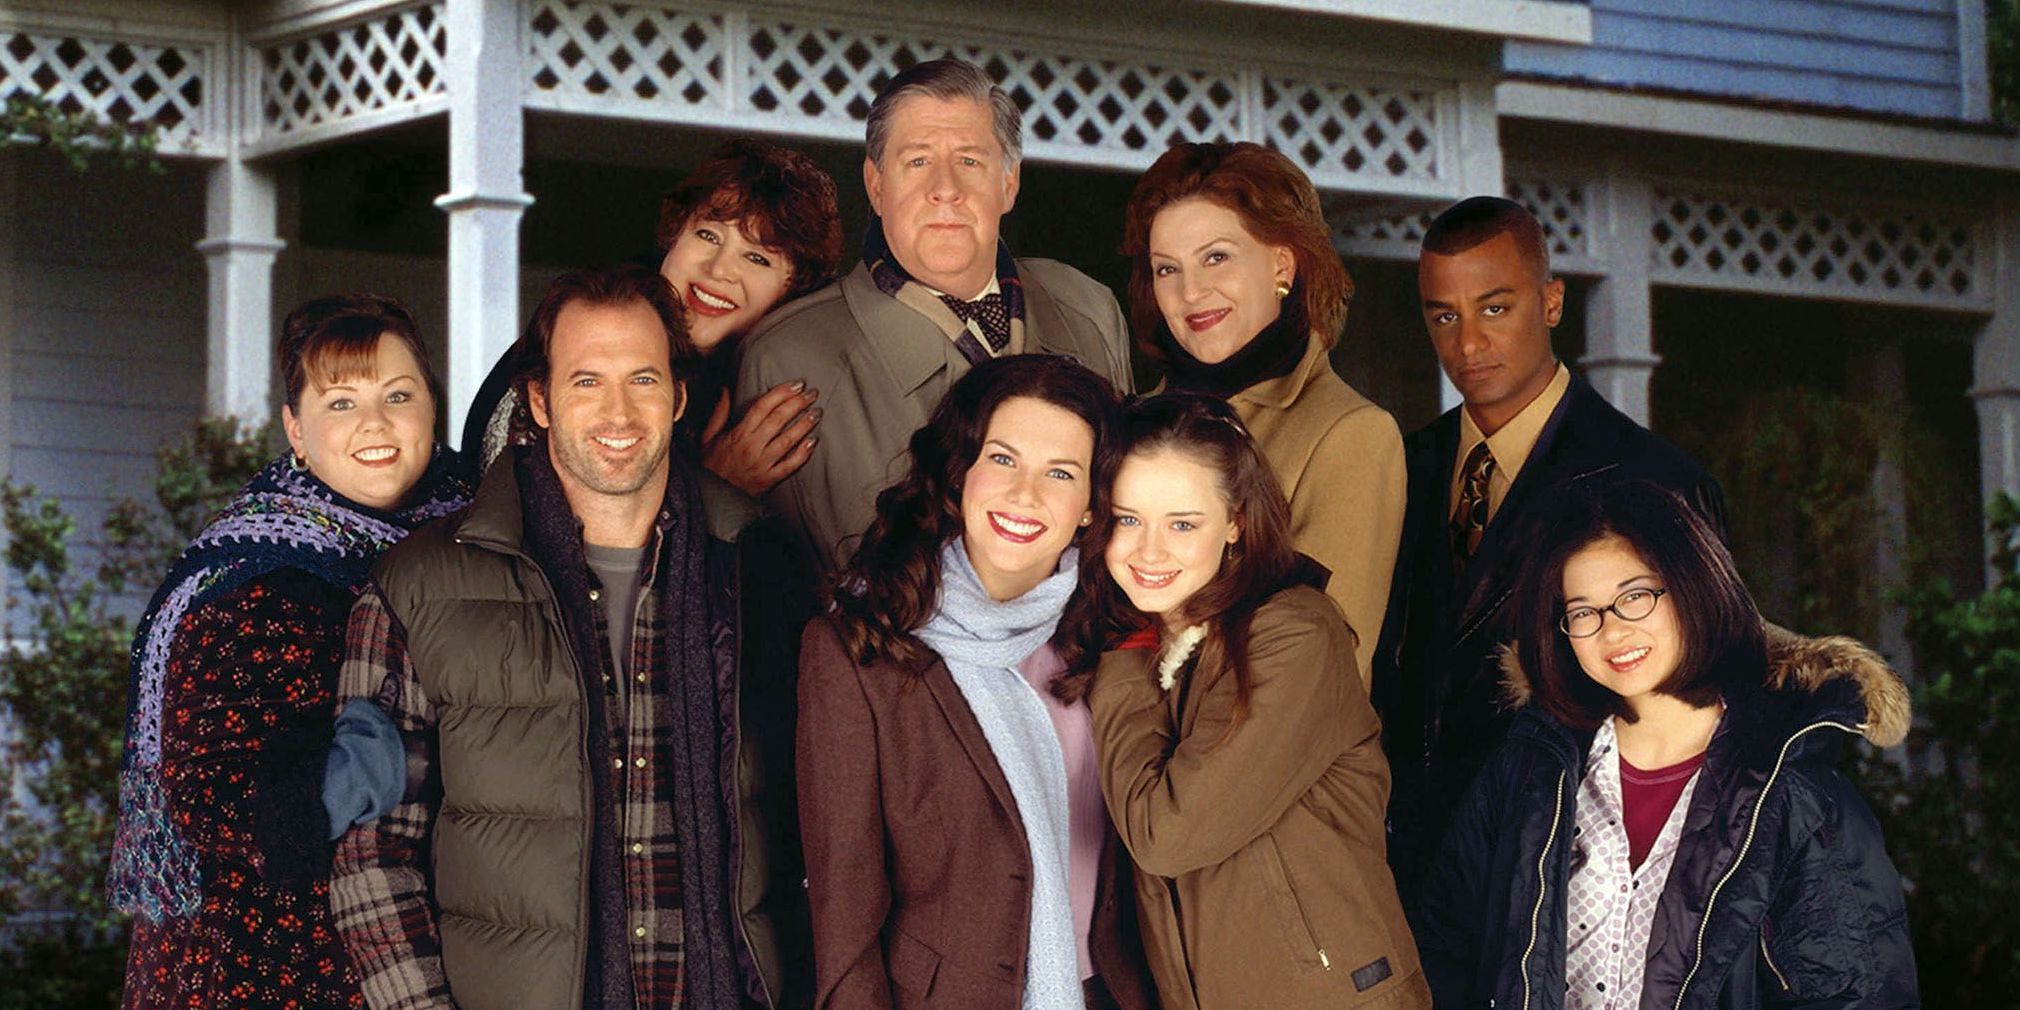 Actors Lauren Graham, Alexis Bledel, Keiko Agena, Scott Patterson, Melissa McCarthy, Kelly Bishop, Edward Herrmann, Yanic Truesdale and and Liz Torres posing for a promotional photo for Gilmore Girls.